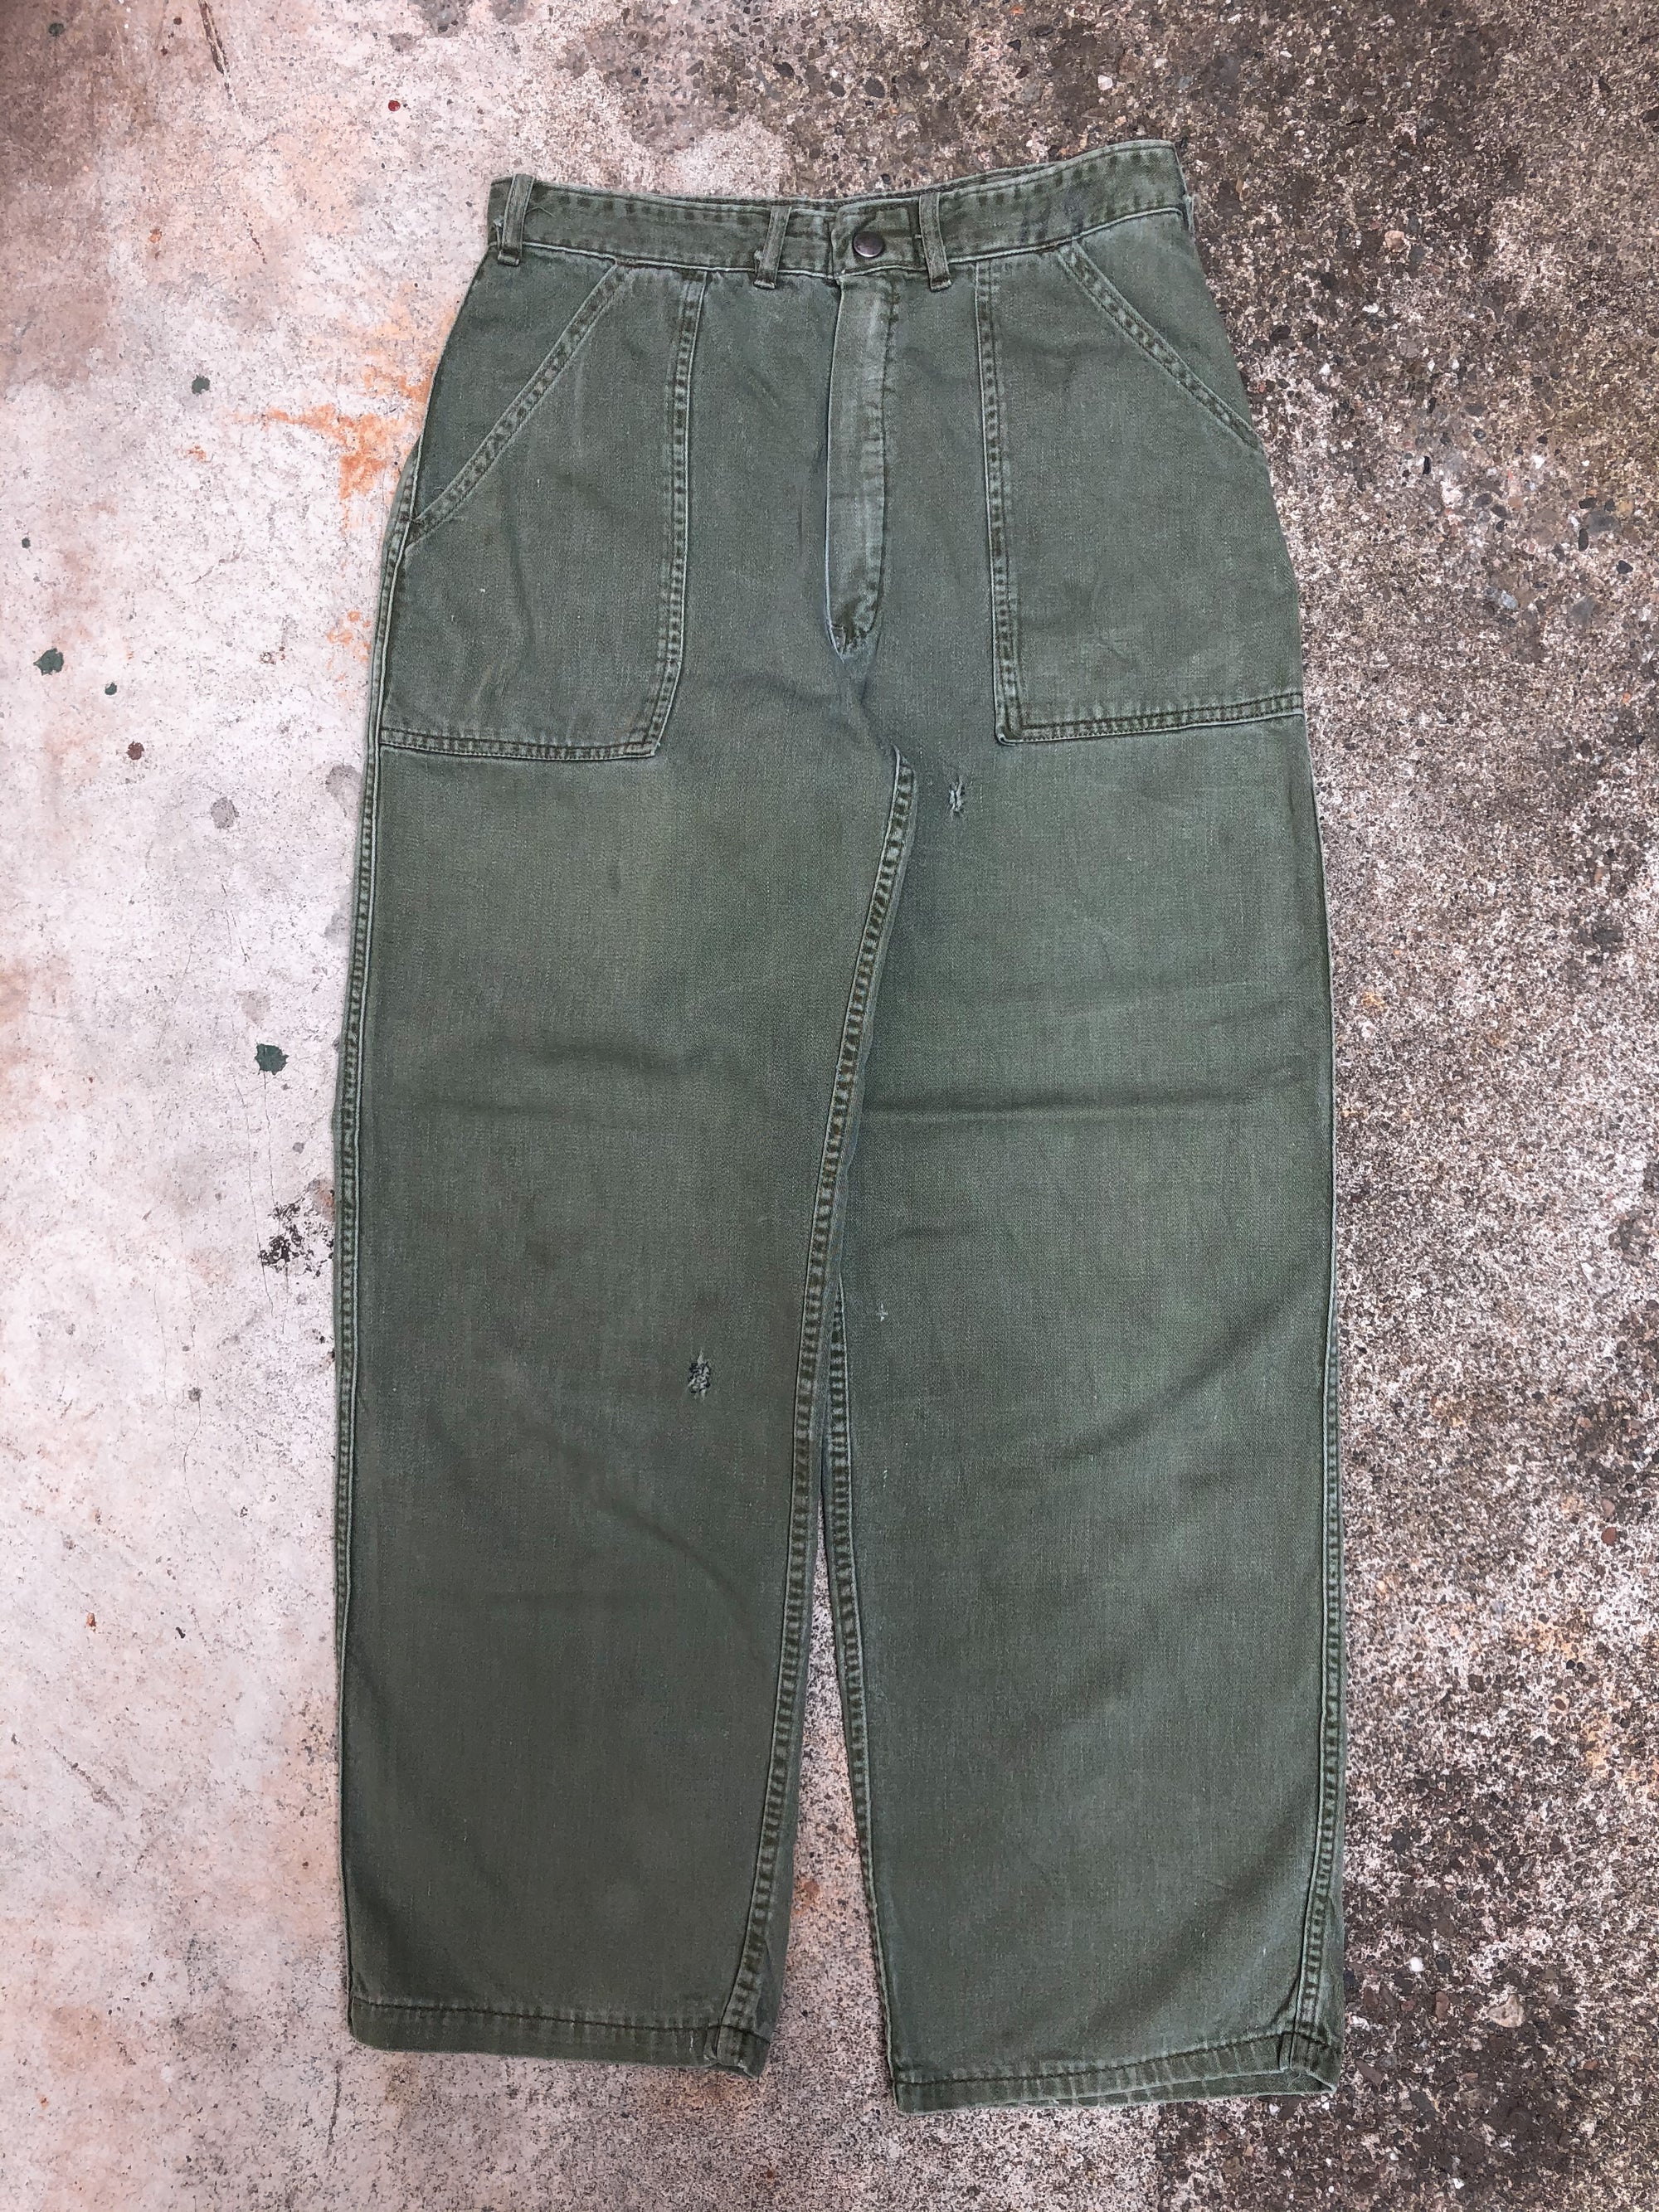 1960s Talon Zip Repaired Faded OG 107 Military Pants (28X27)